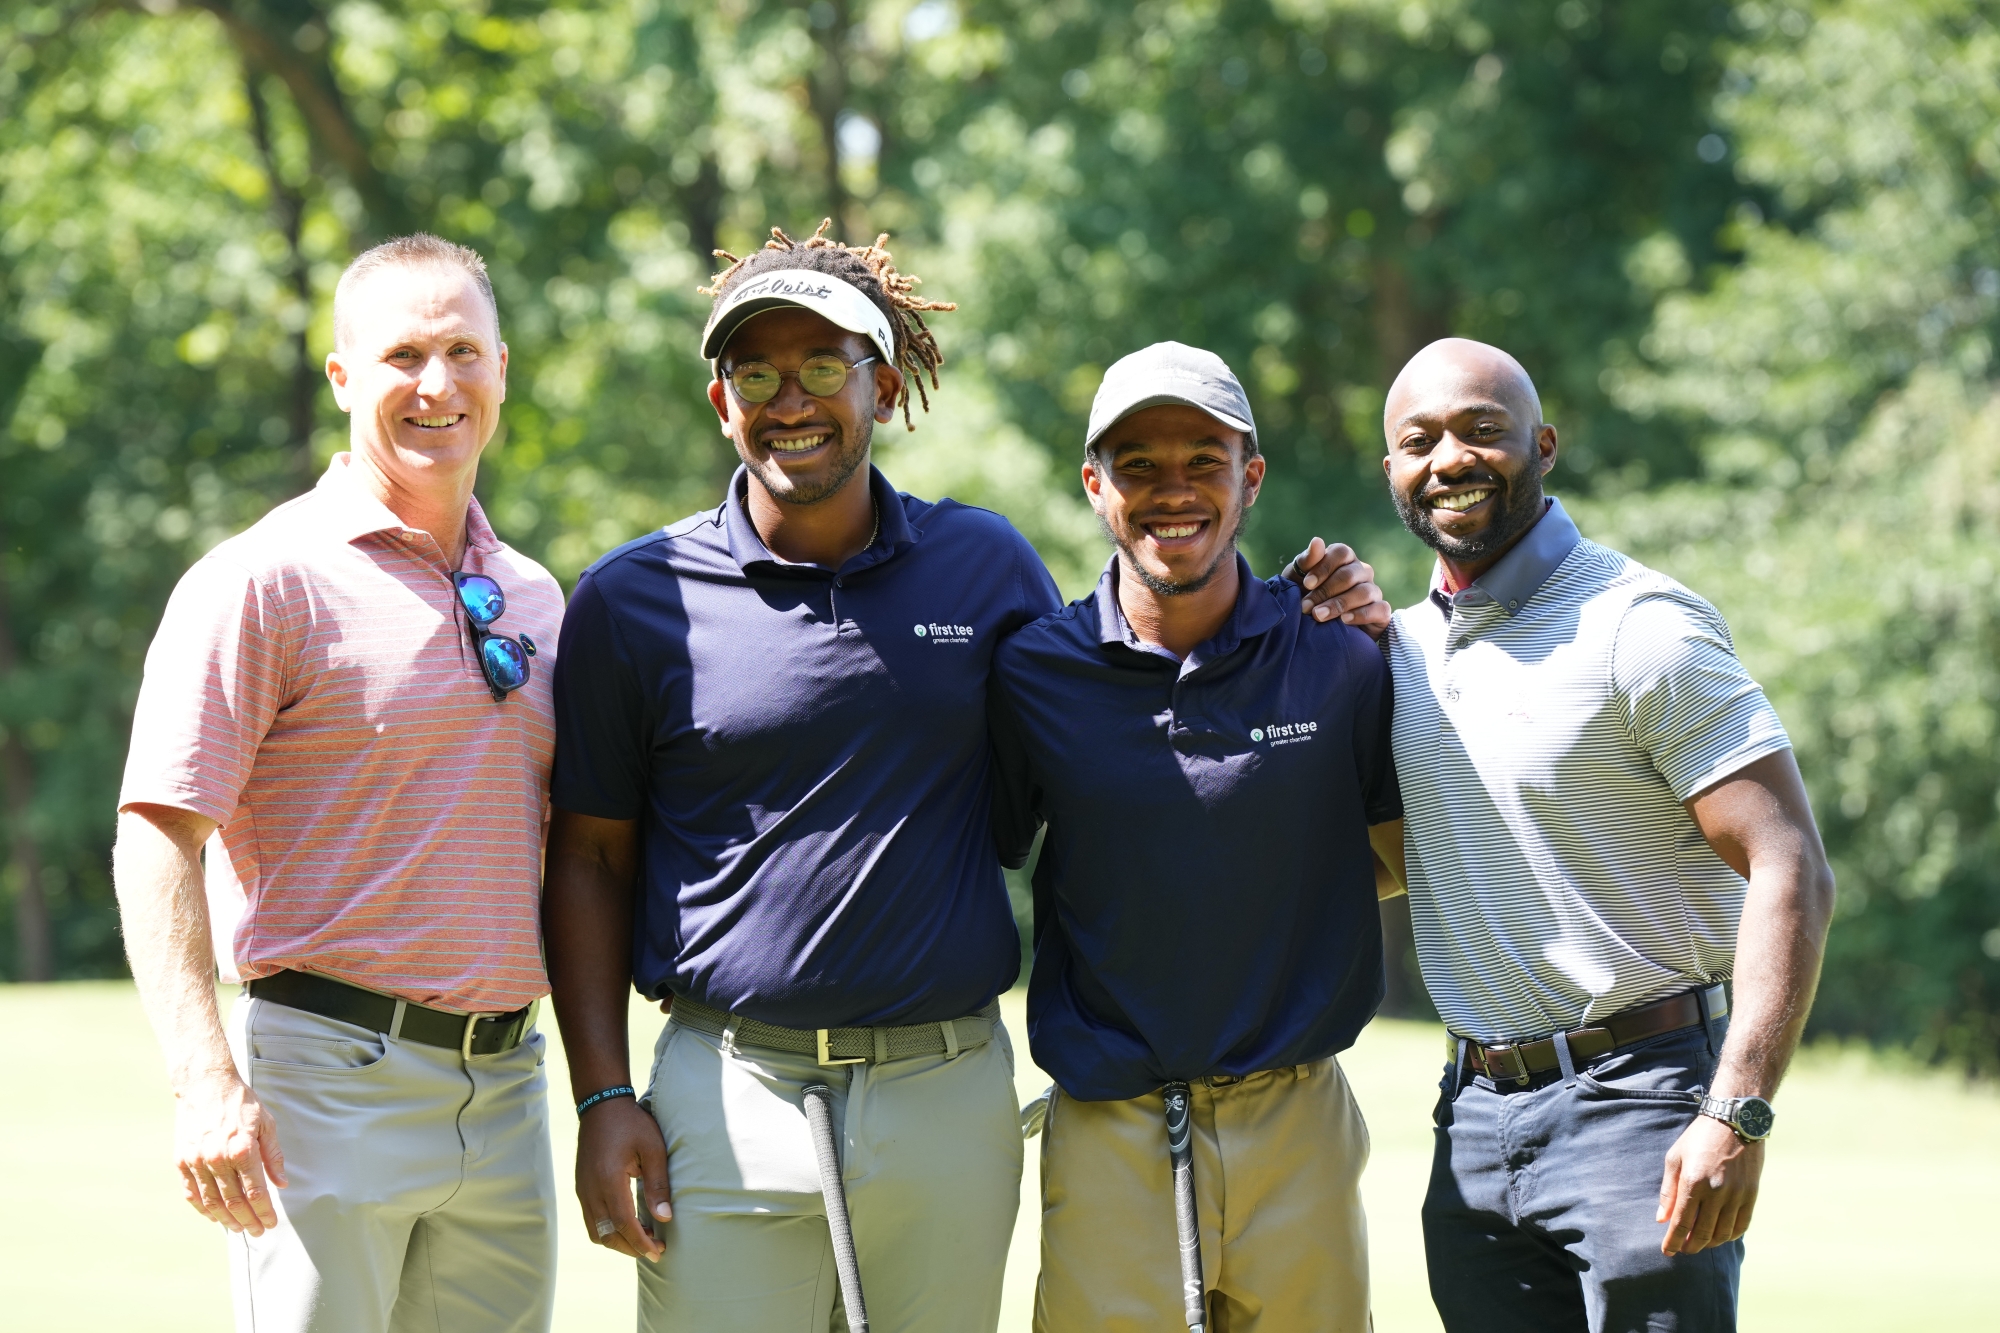 New to the tournament is a partnership with First Tee of Greater Charlotte